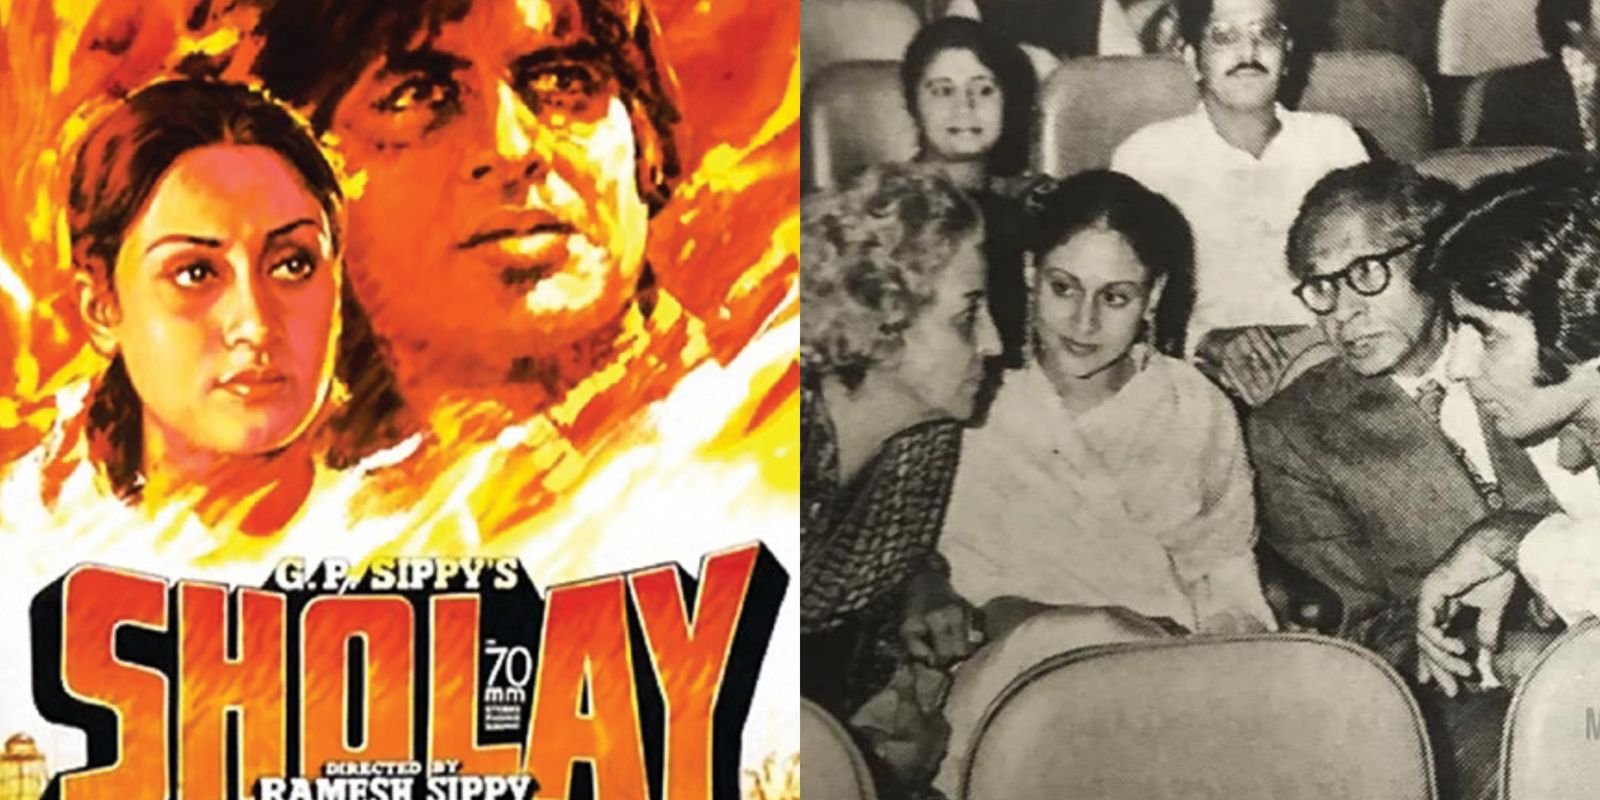 Amitabh Bachchan And Jaya Bachchan’s Throwback Picture From Sholay Premiere Will Hit You With Nostalgia